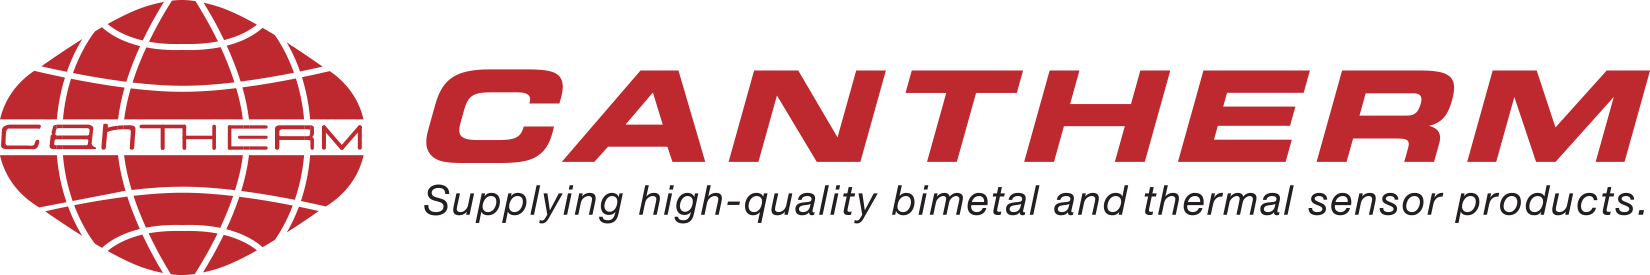 Cantherm LOGO